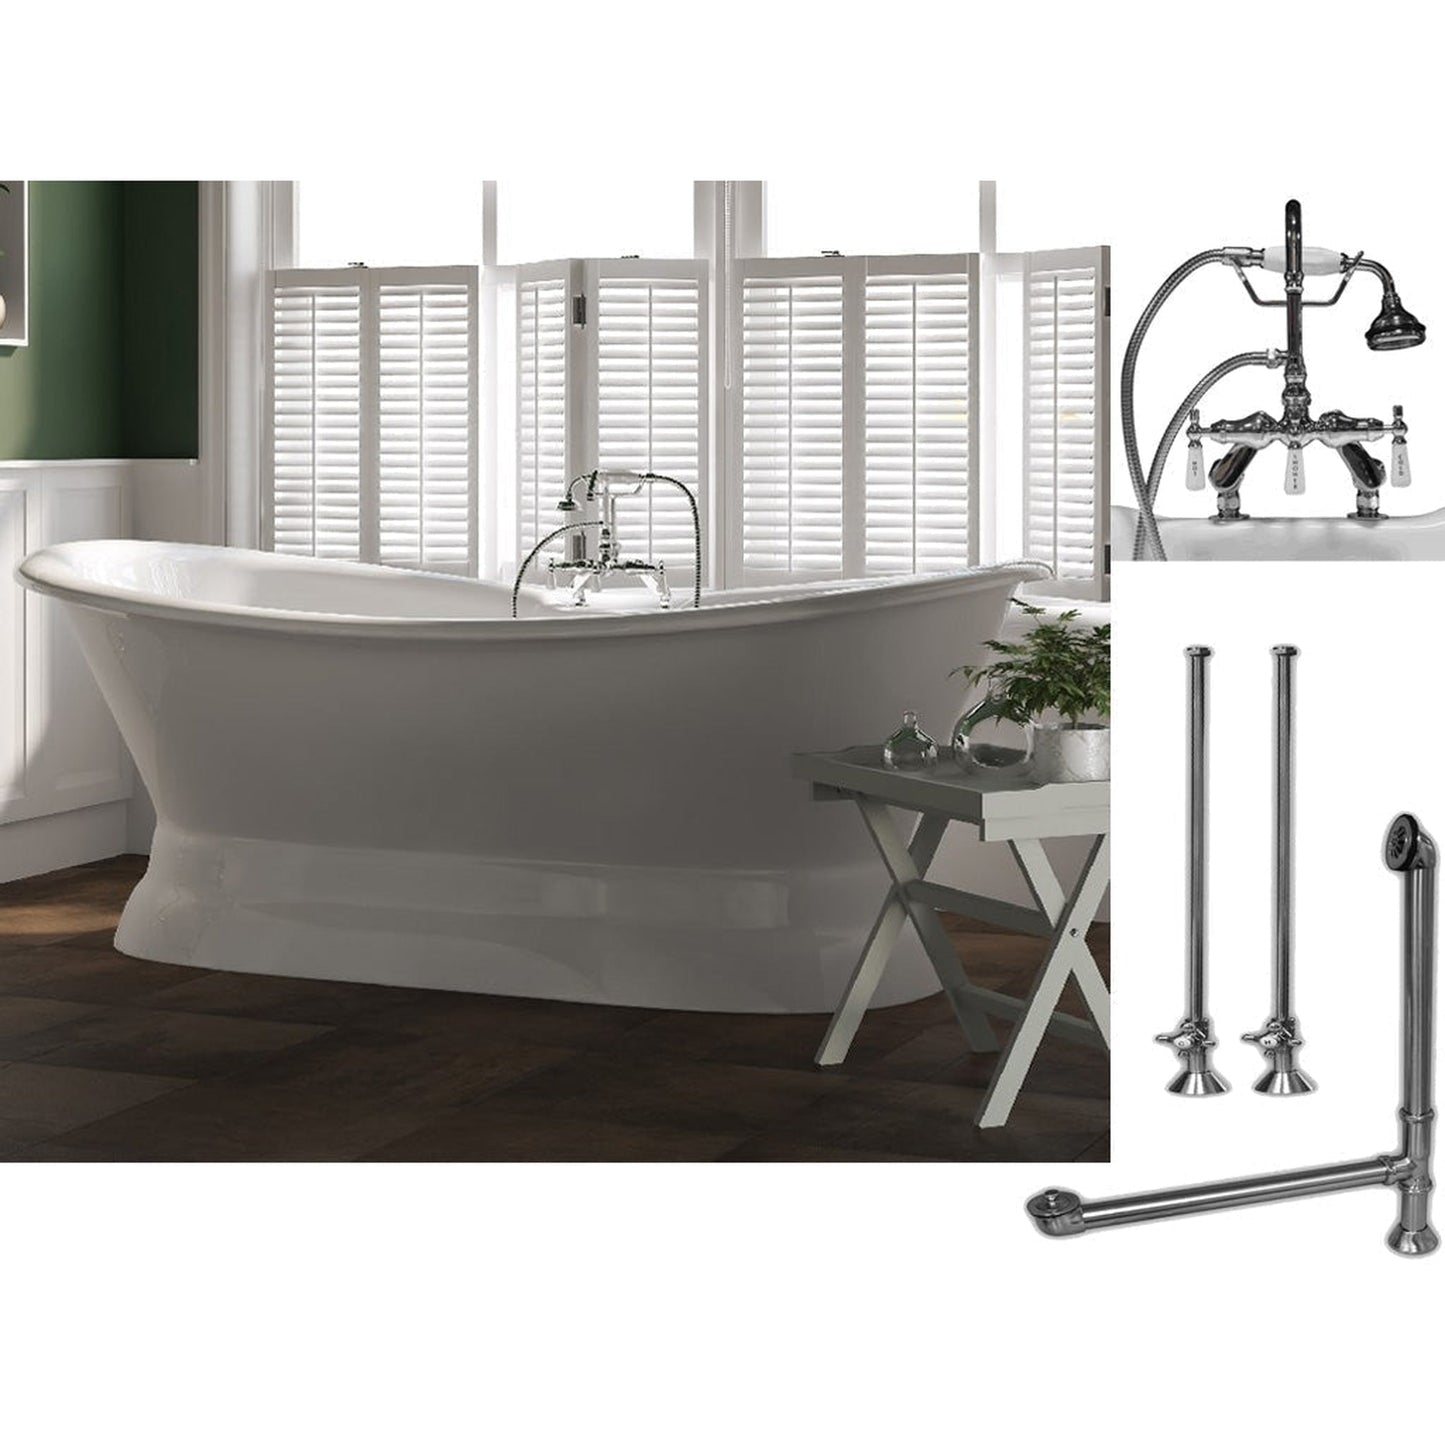 Cambridge Plumbing 71" White Cast Iron Double Slipper Pedestal Bathtub With Deck Holes And Complete Plumbing Package Including Porcelain Lever English Telephone Brass Faucet, Supply Lines, Drain And Overflow Assembly In Polished Chrome